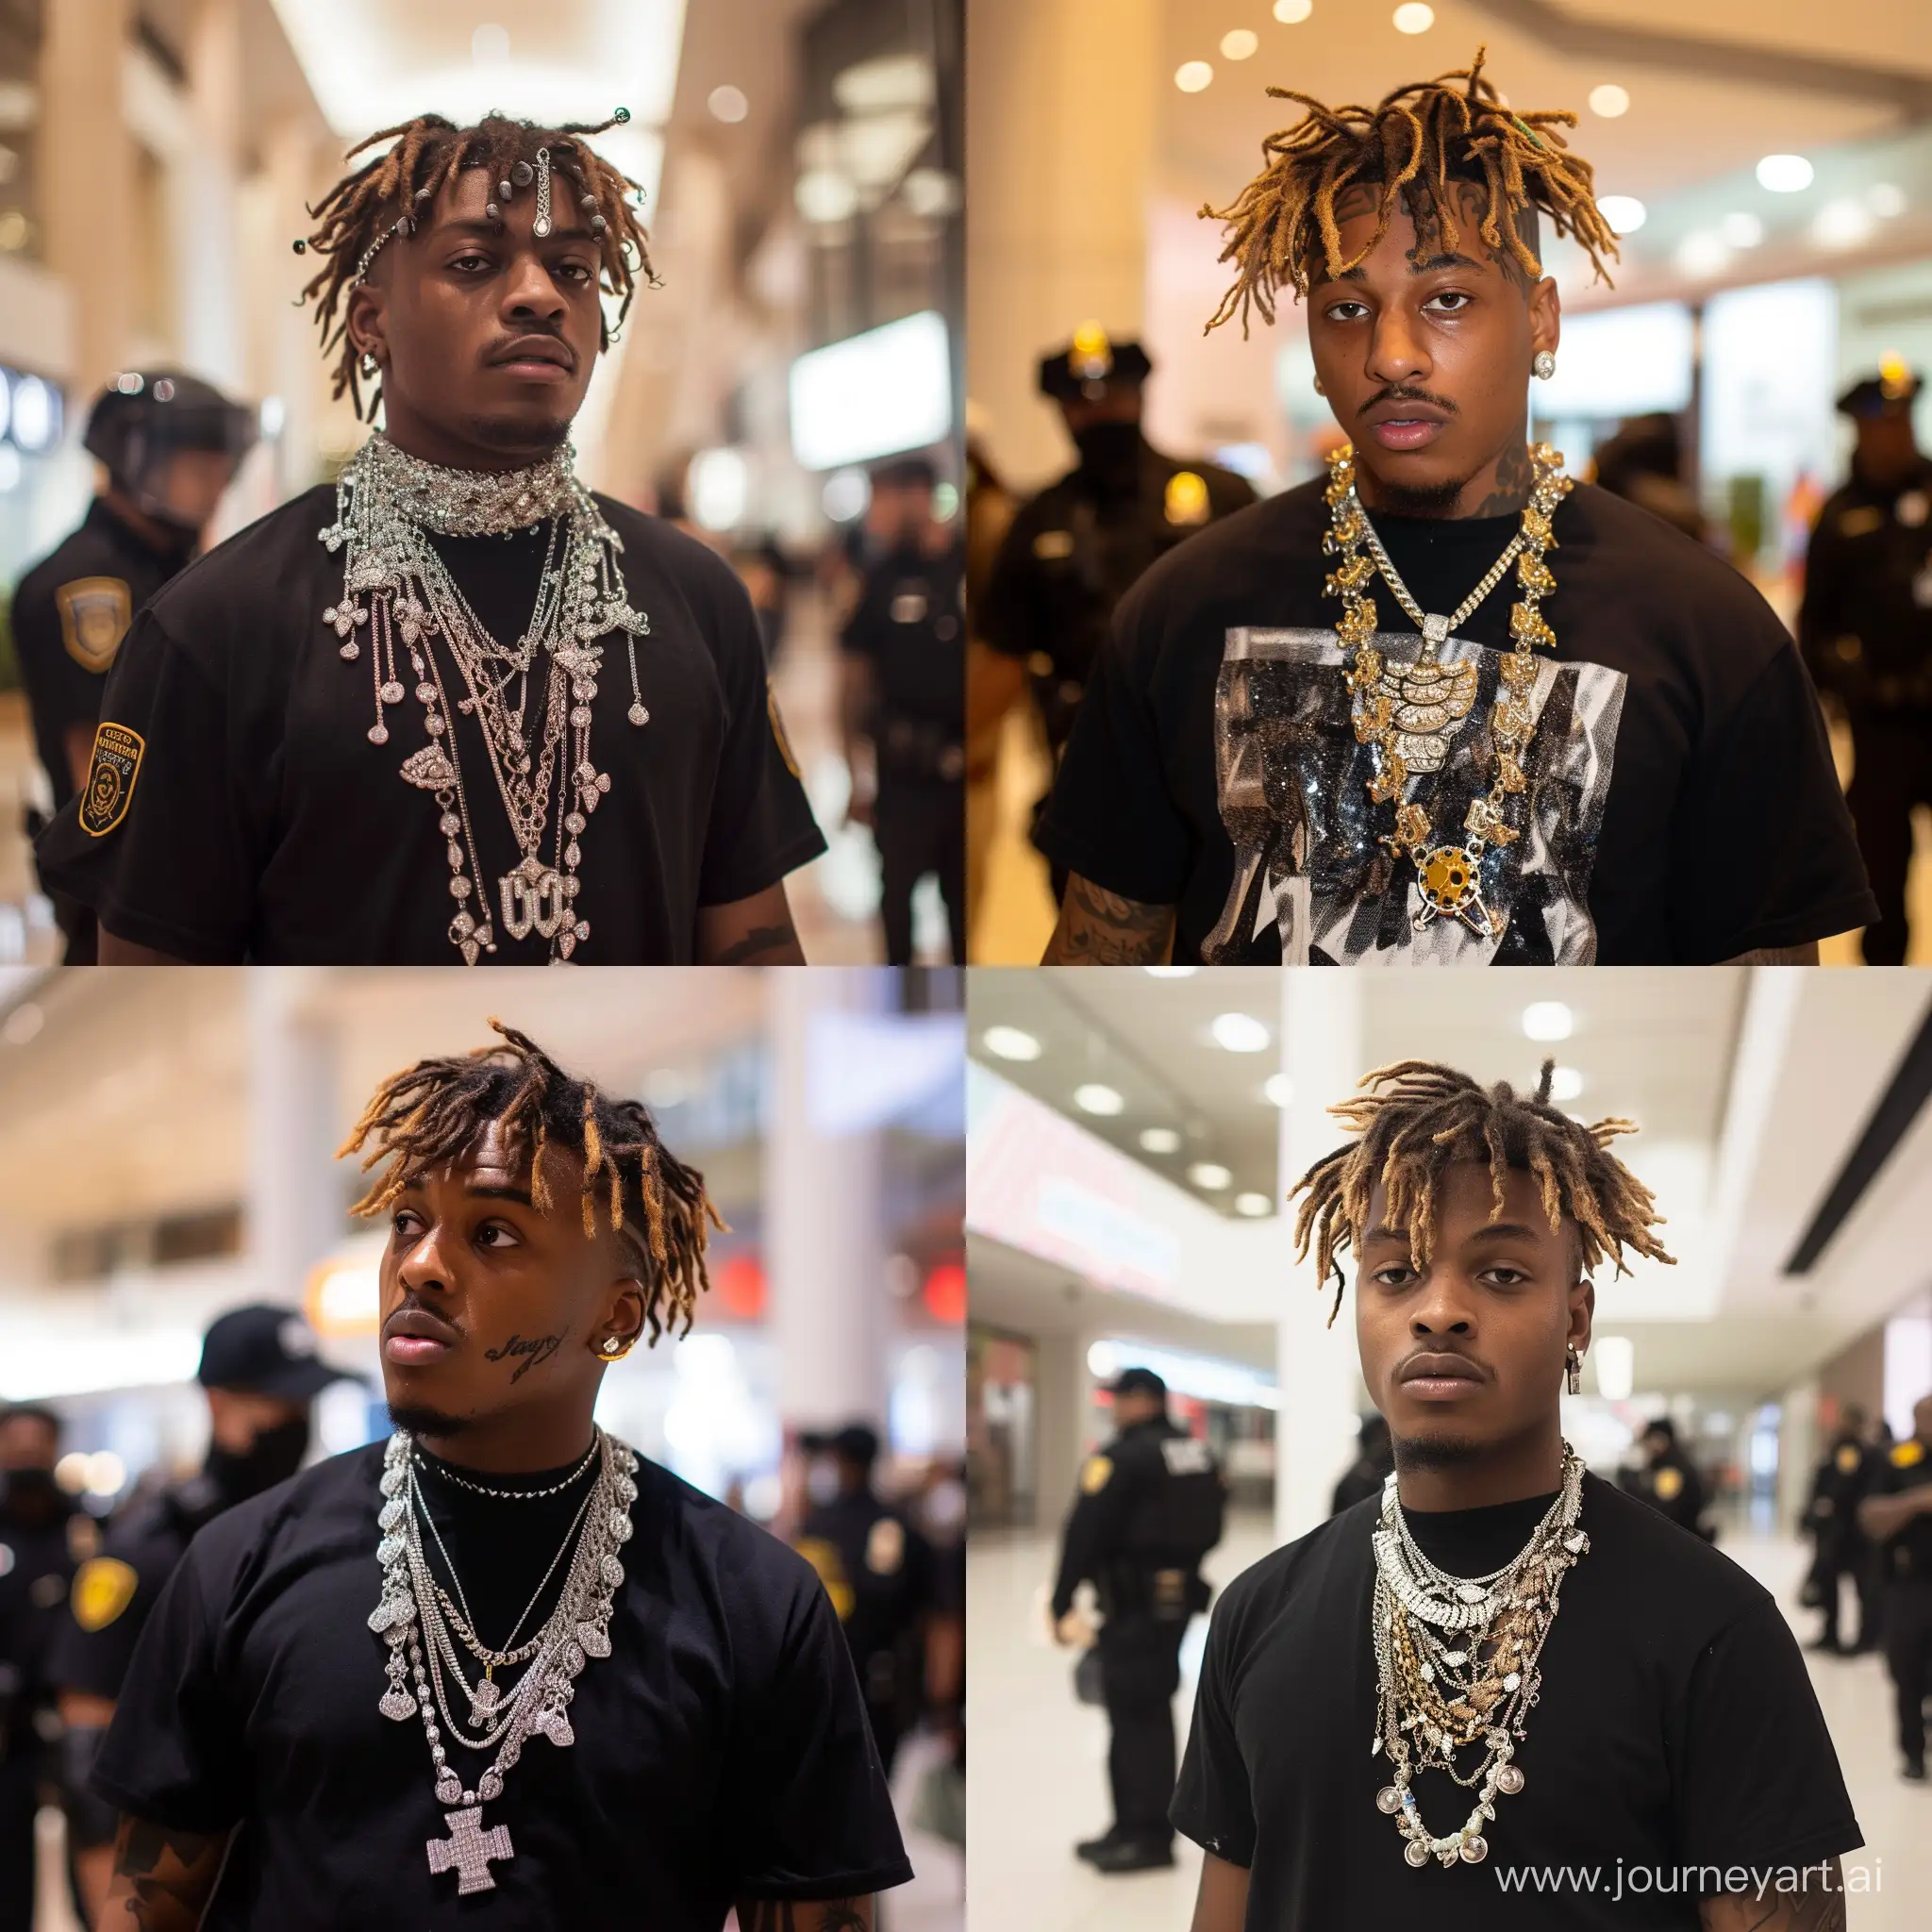 A Photograph of Juice WRLD wearing Jewelry,In a mall with security,Buying Shoes